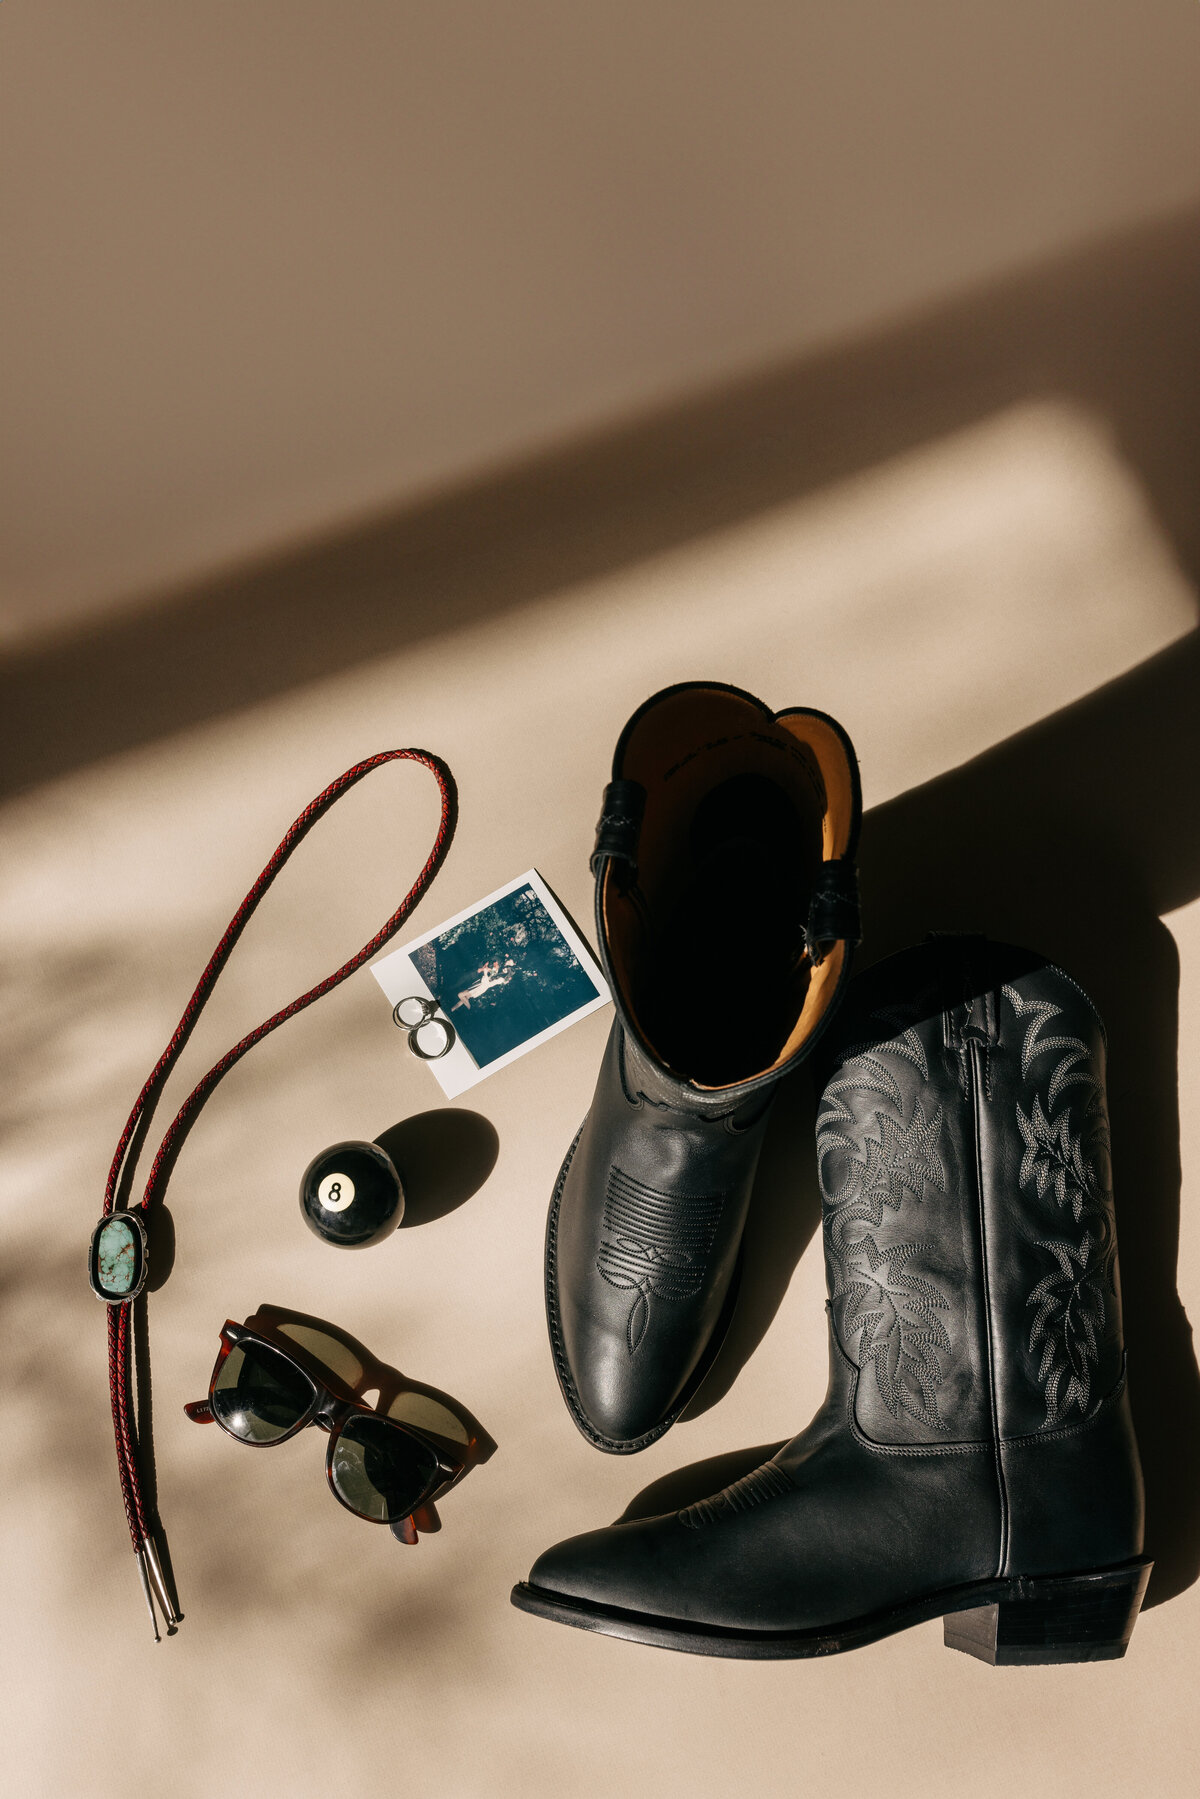 jade bolo tie sunglasses 8 ball polaroid wedding rings and black cowboy boots laying in the sunlight for a wedding detail shot